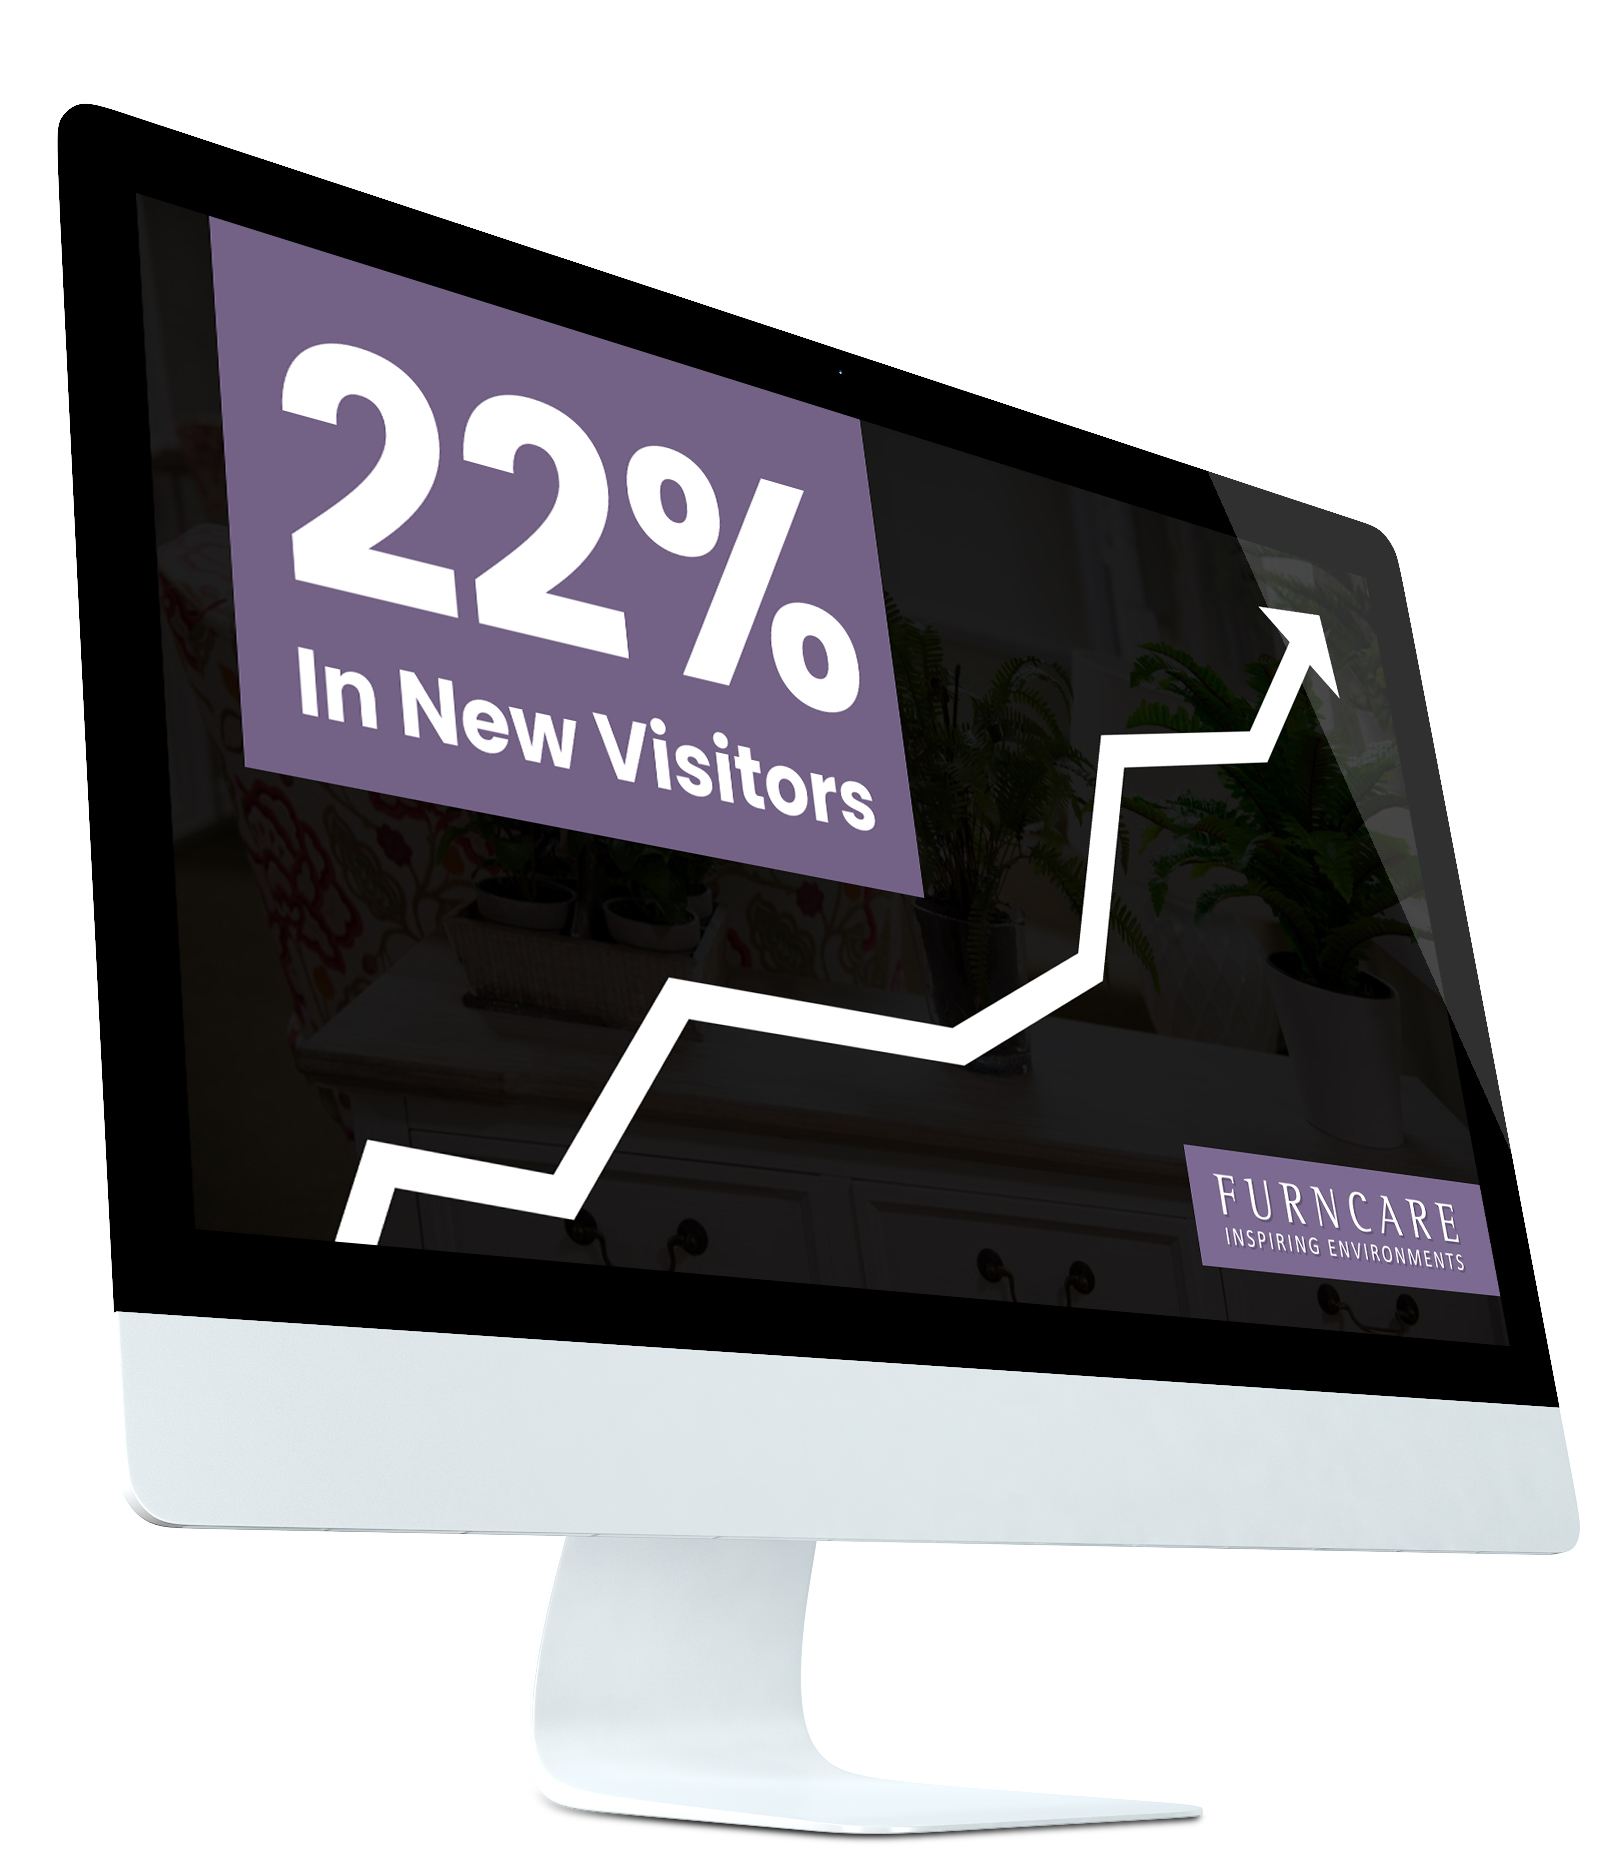 22% increase in new visitors